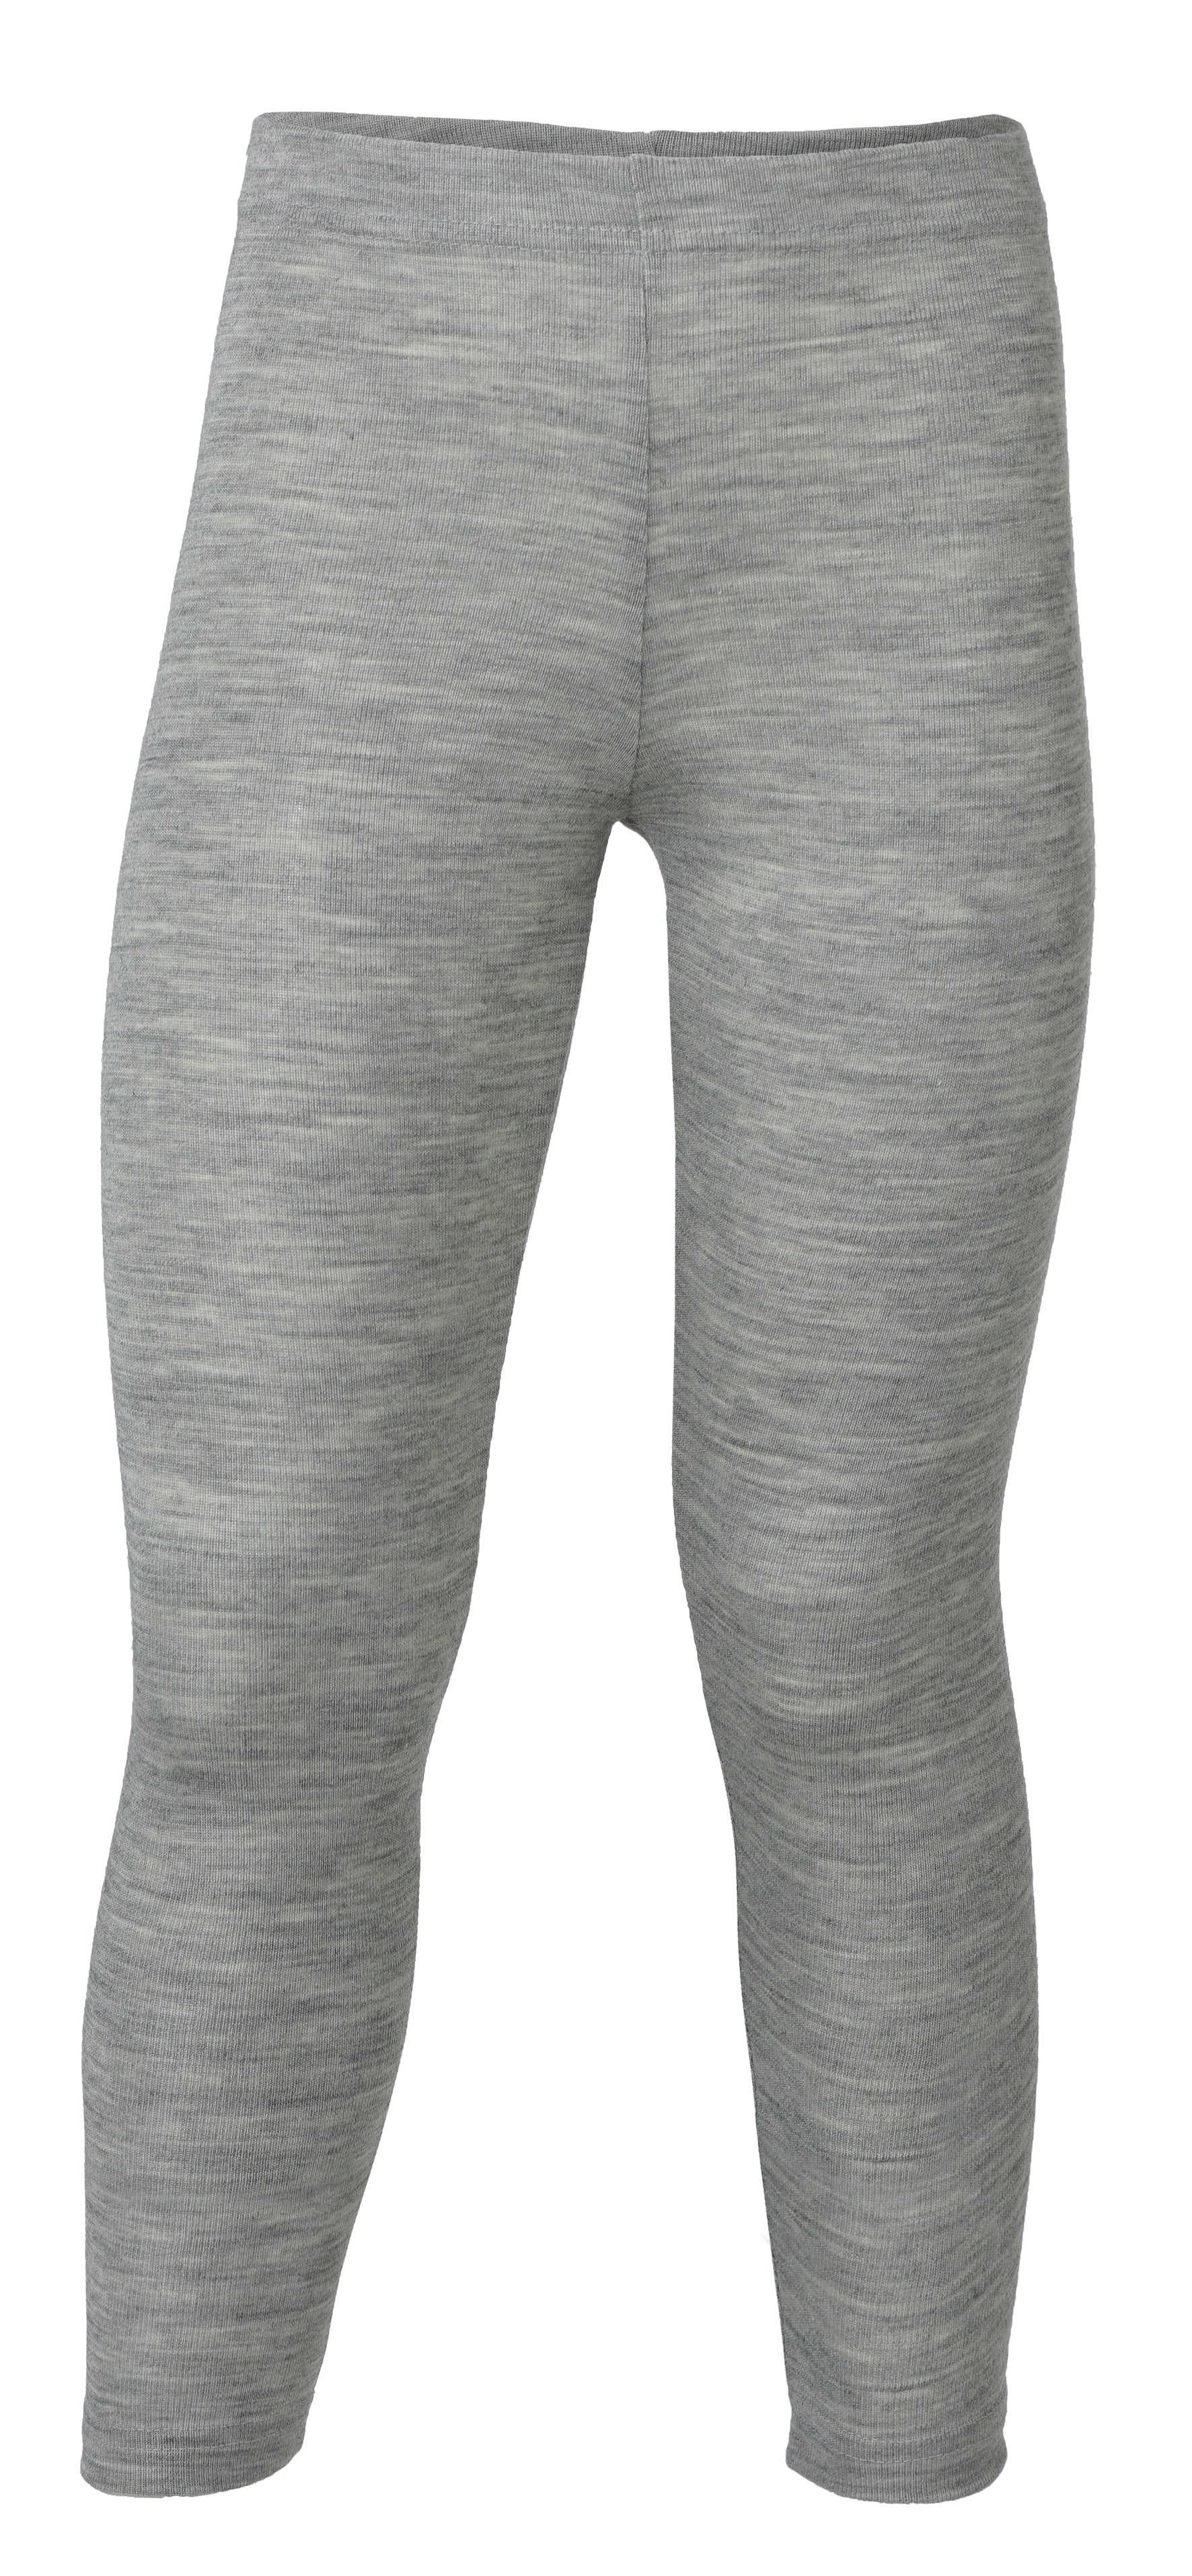 OLYMPIA - white merino jersey 190 gr leggings for woman, Rewoolution